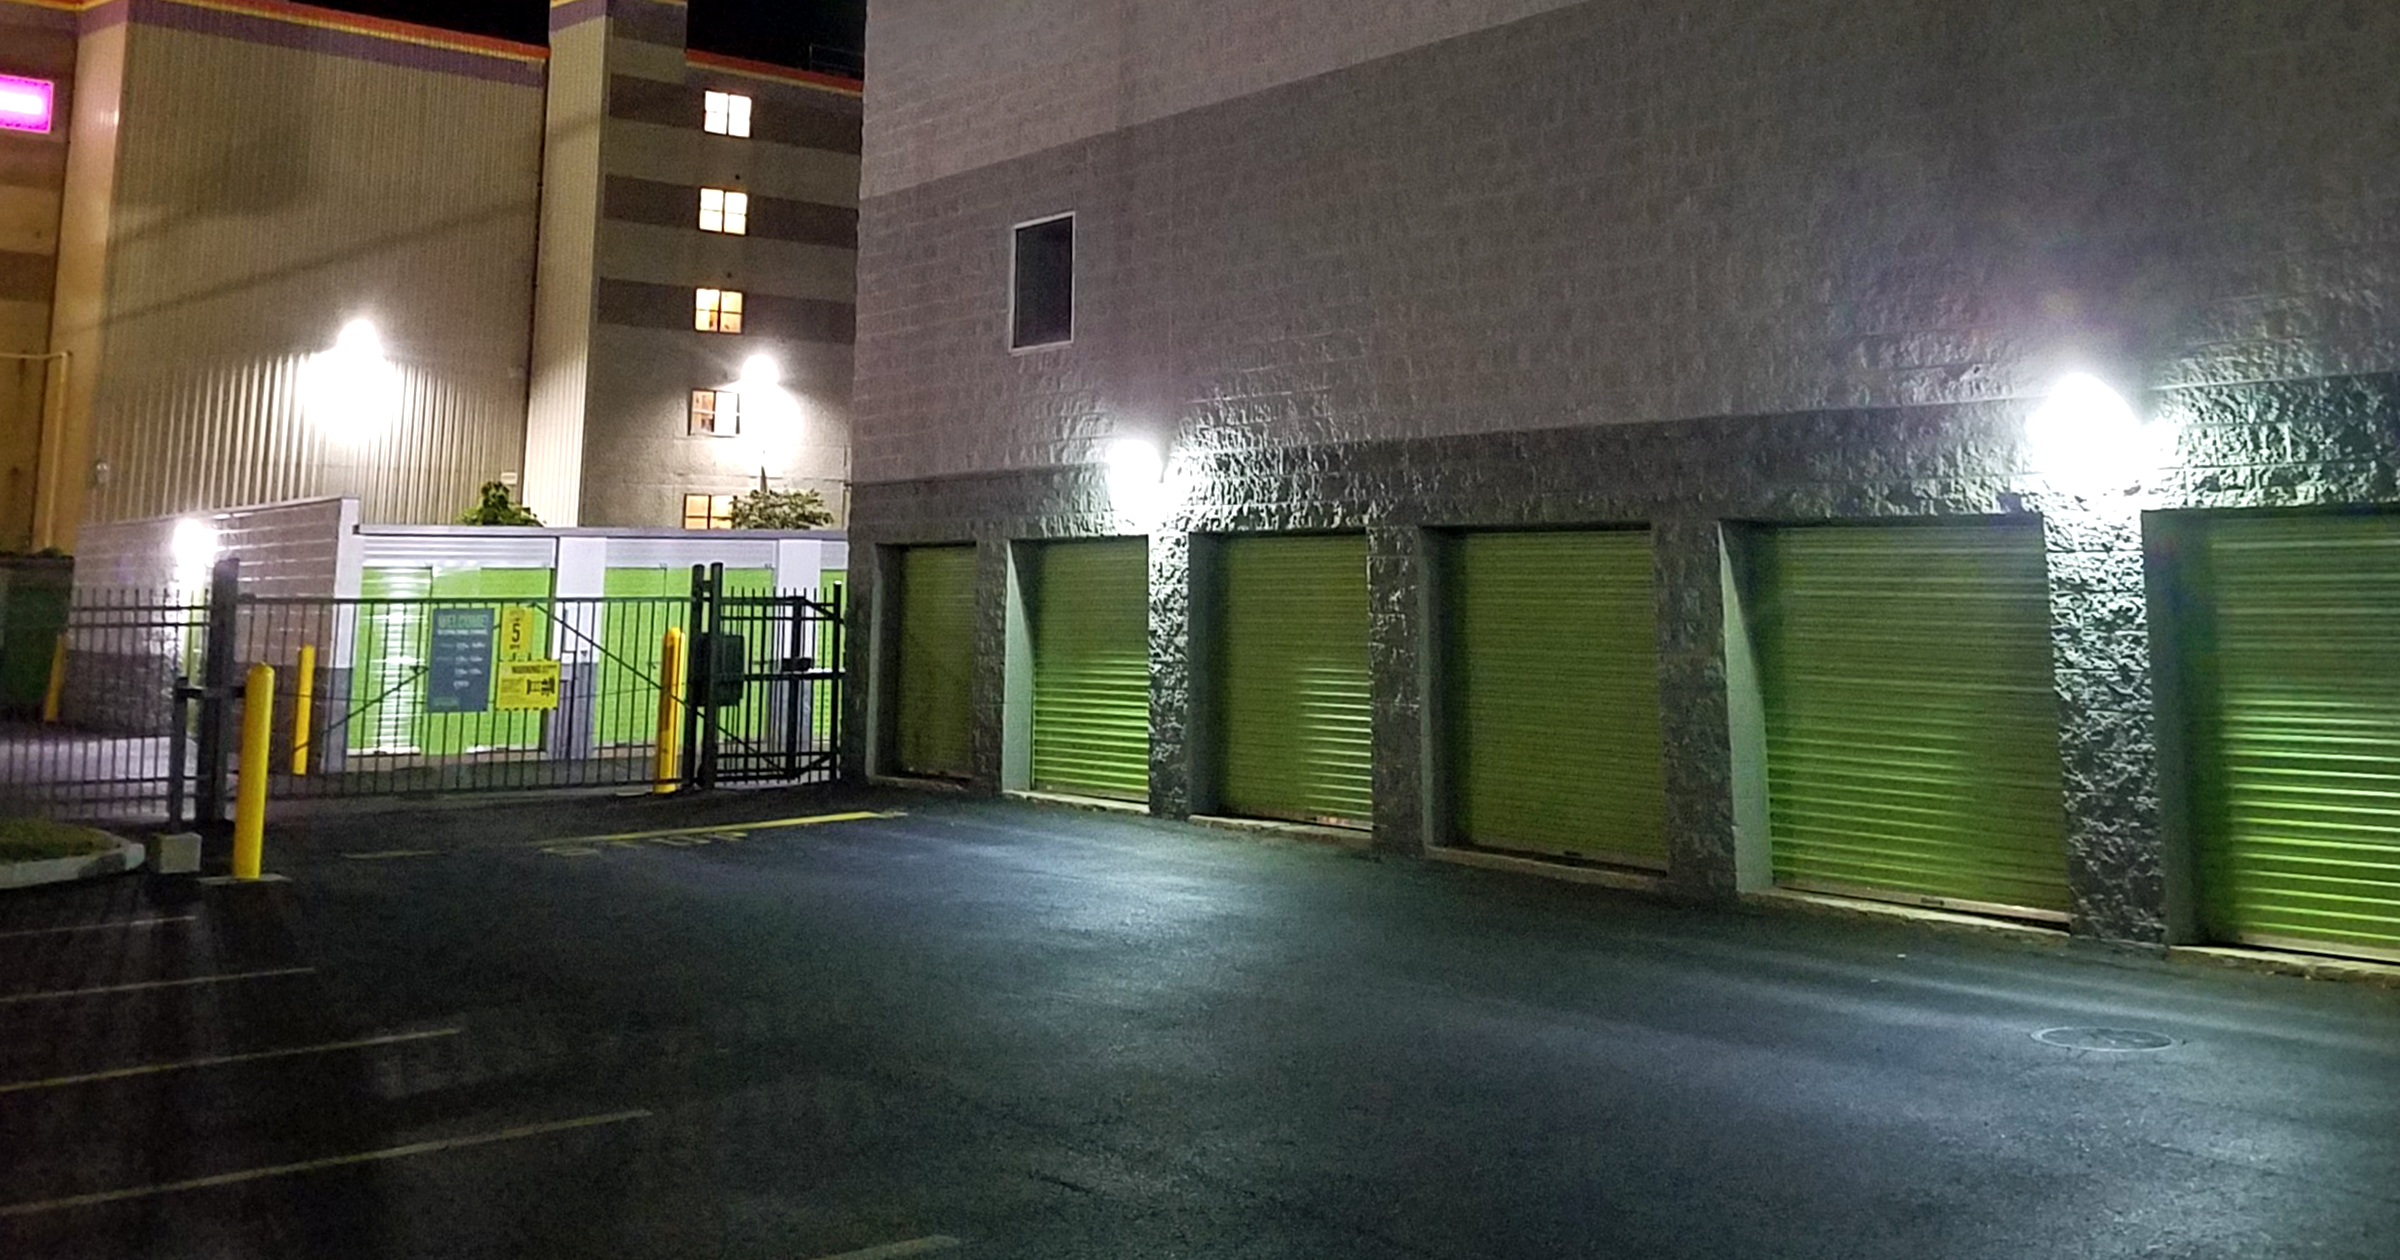 The Best Ways Self-Storage Facilities Utilize LED Lighting for Safety and Security